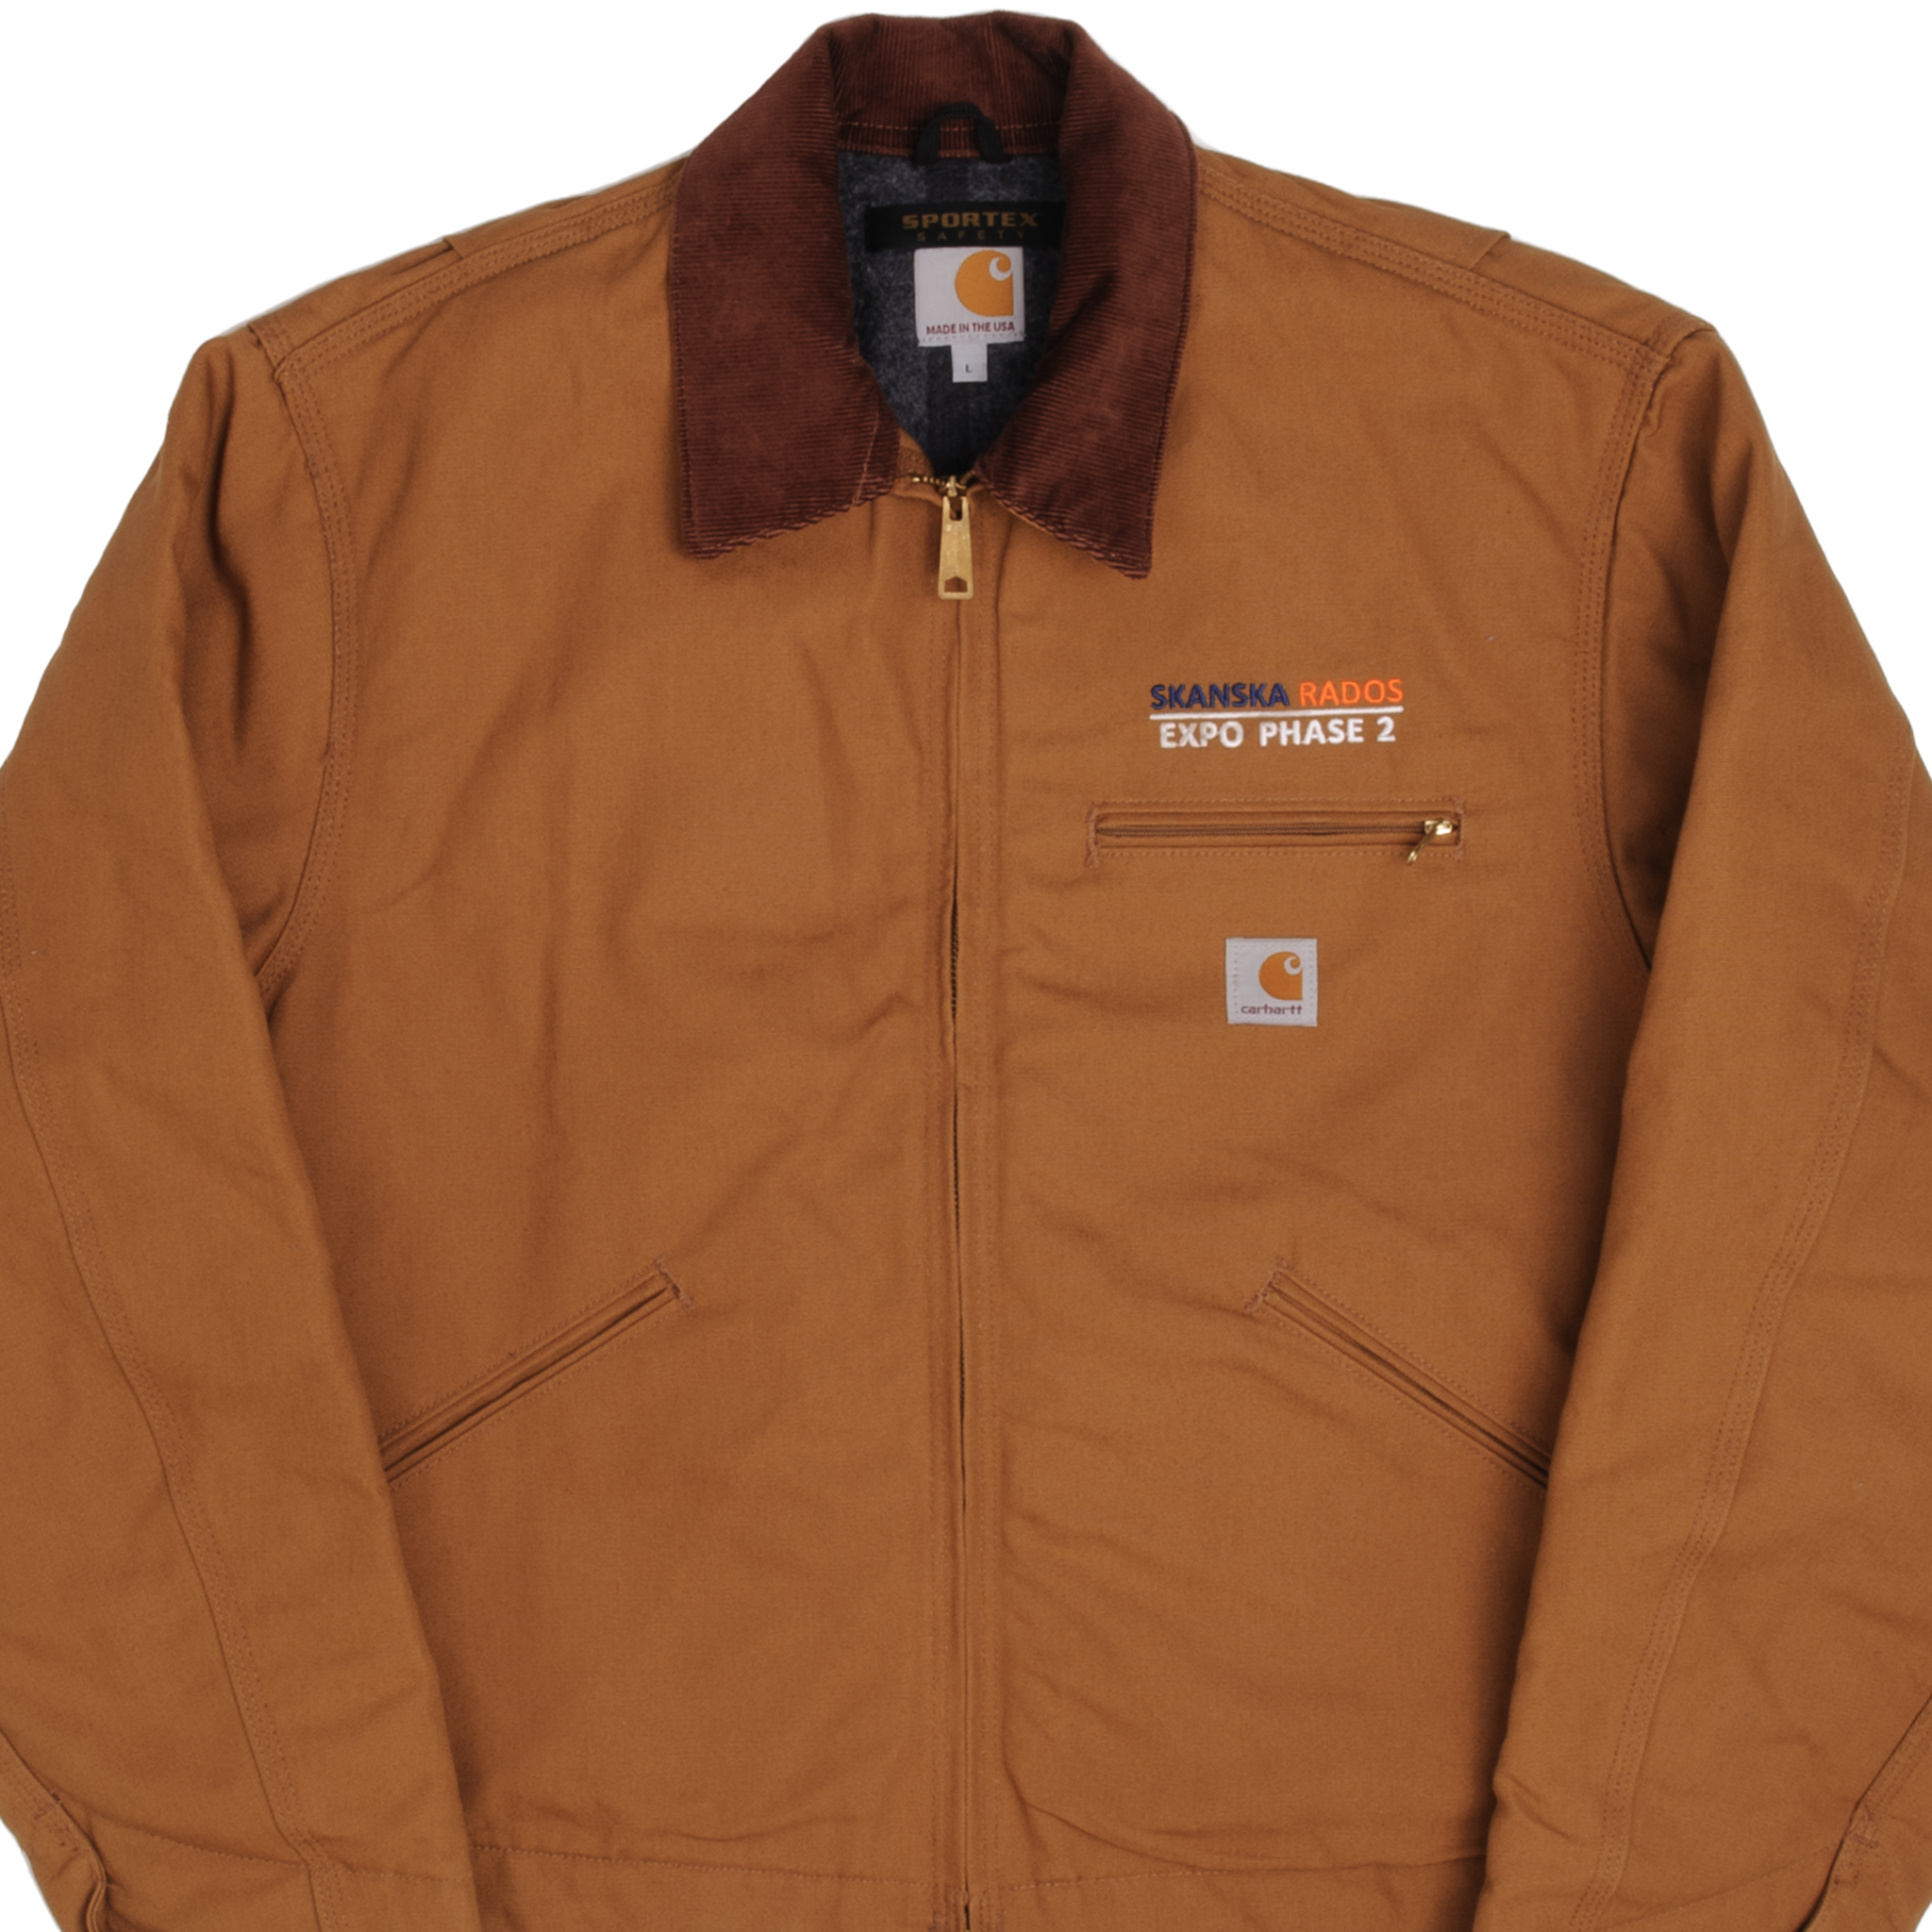 VINTAGE CARHARTT DETROIT STYLE WORKER JACKET 1990S LARGE MADE USA